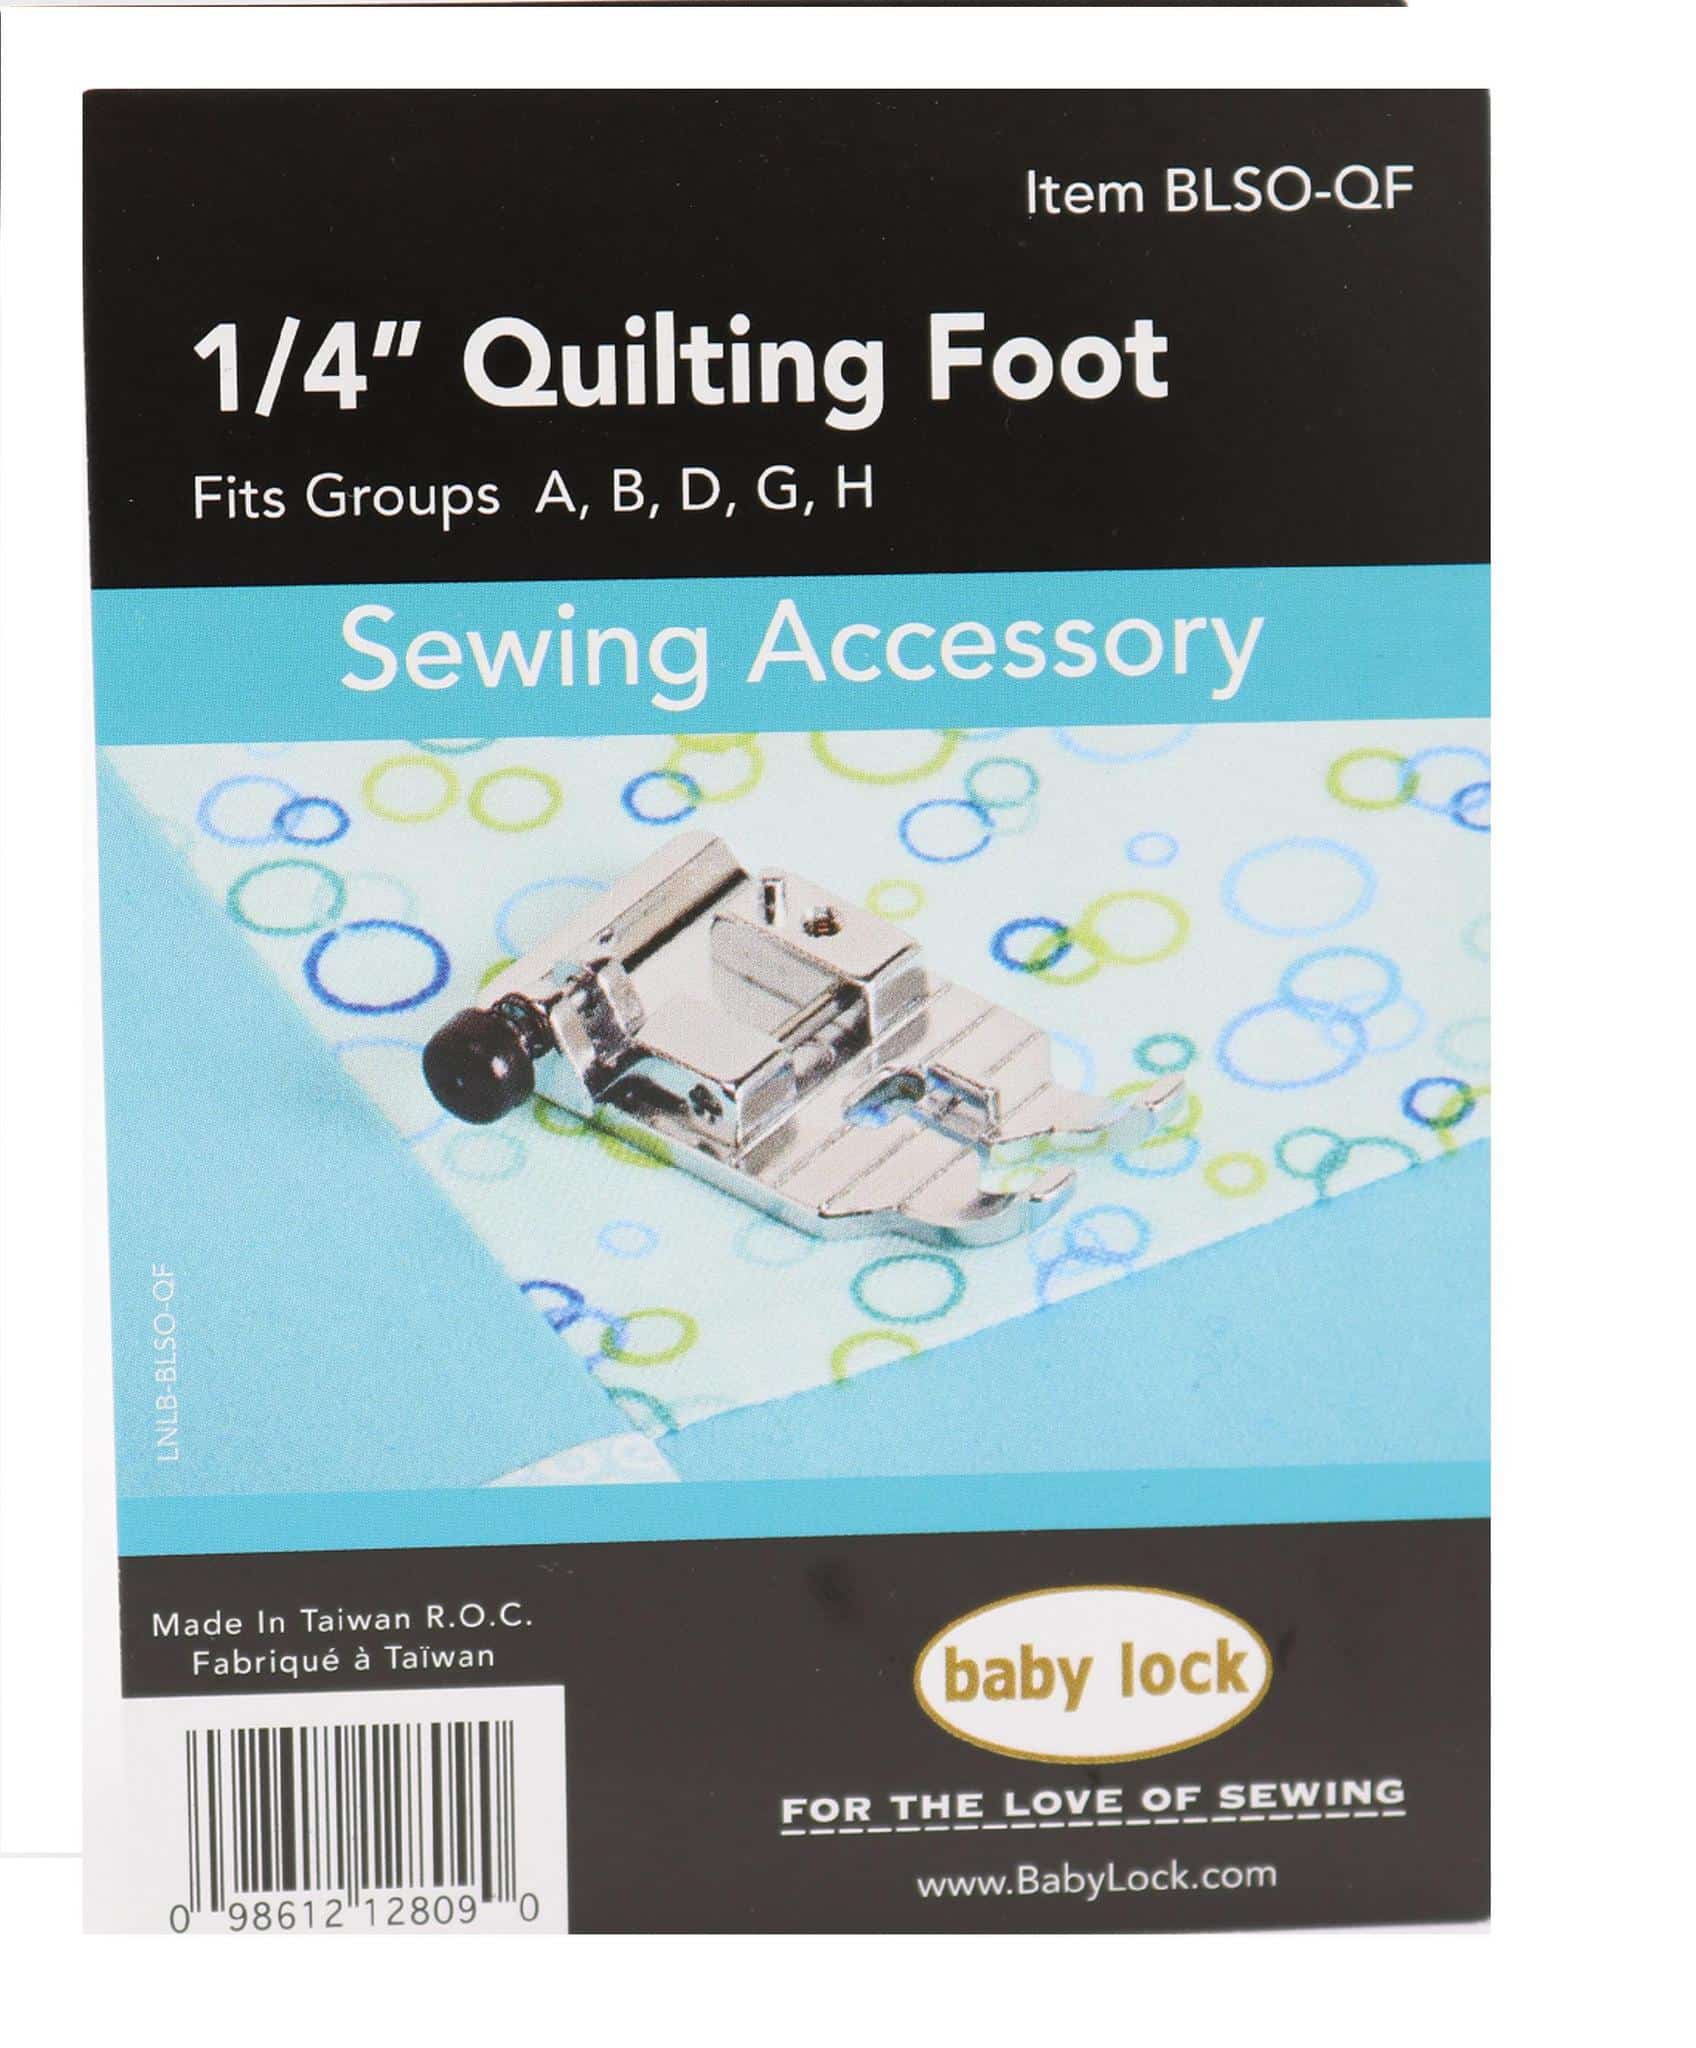 1/4 Quilting Foot